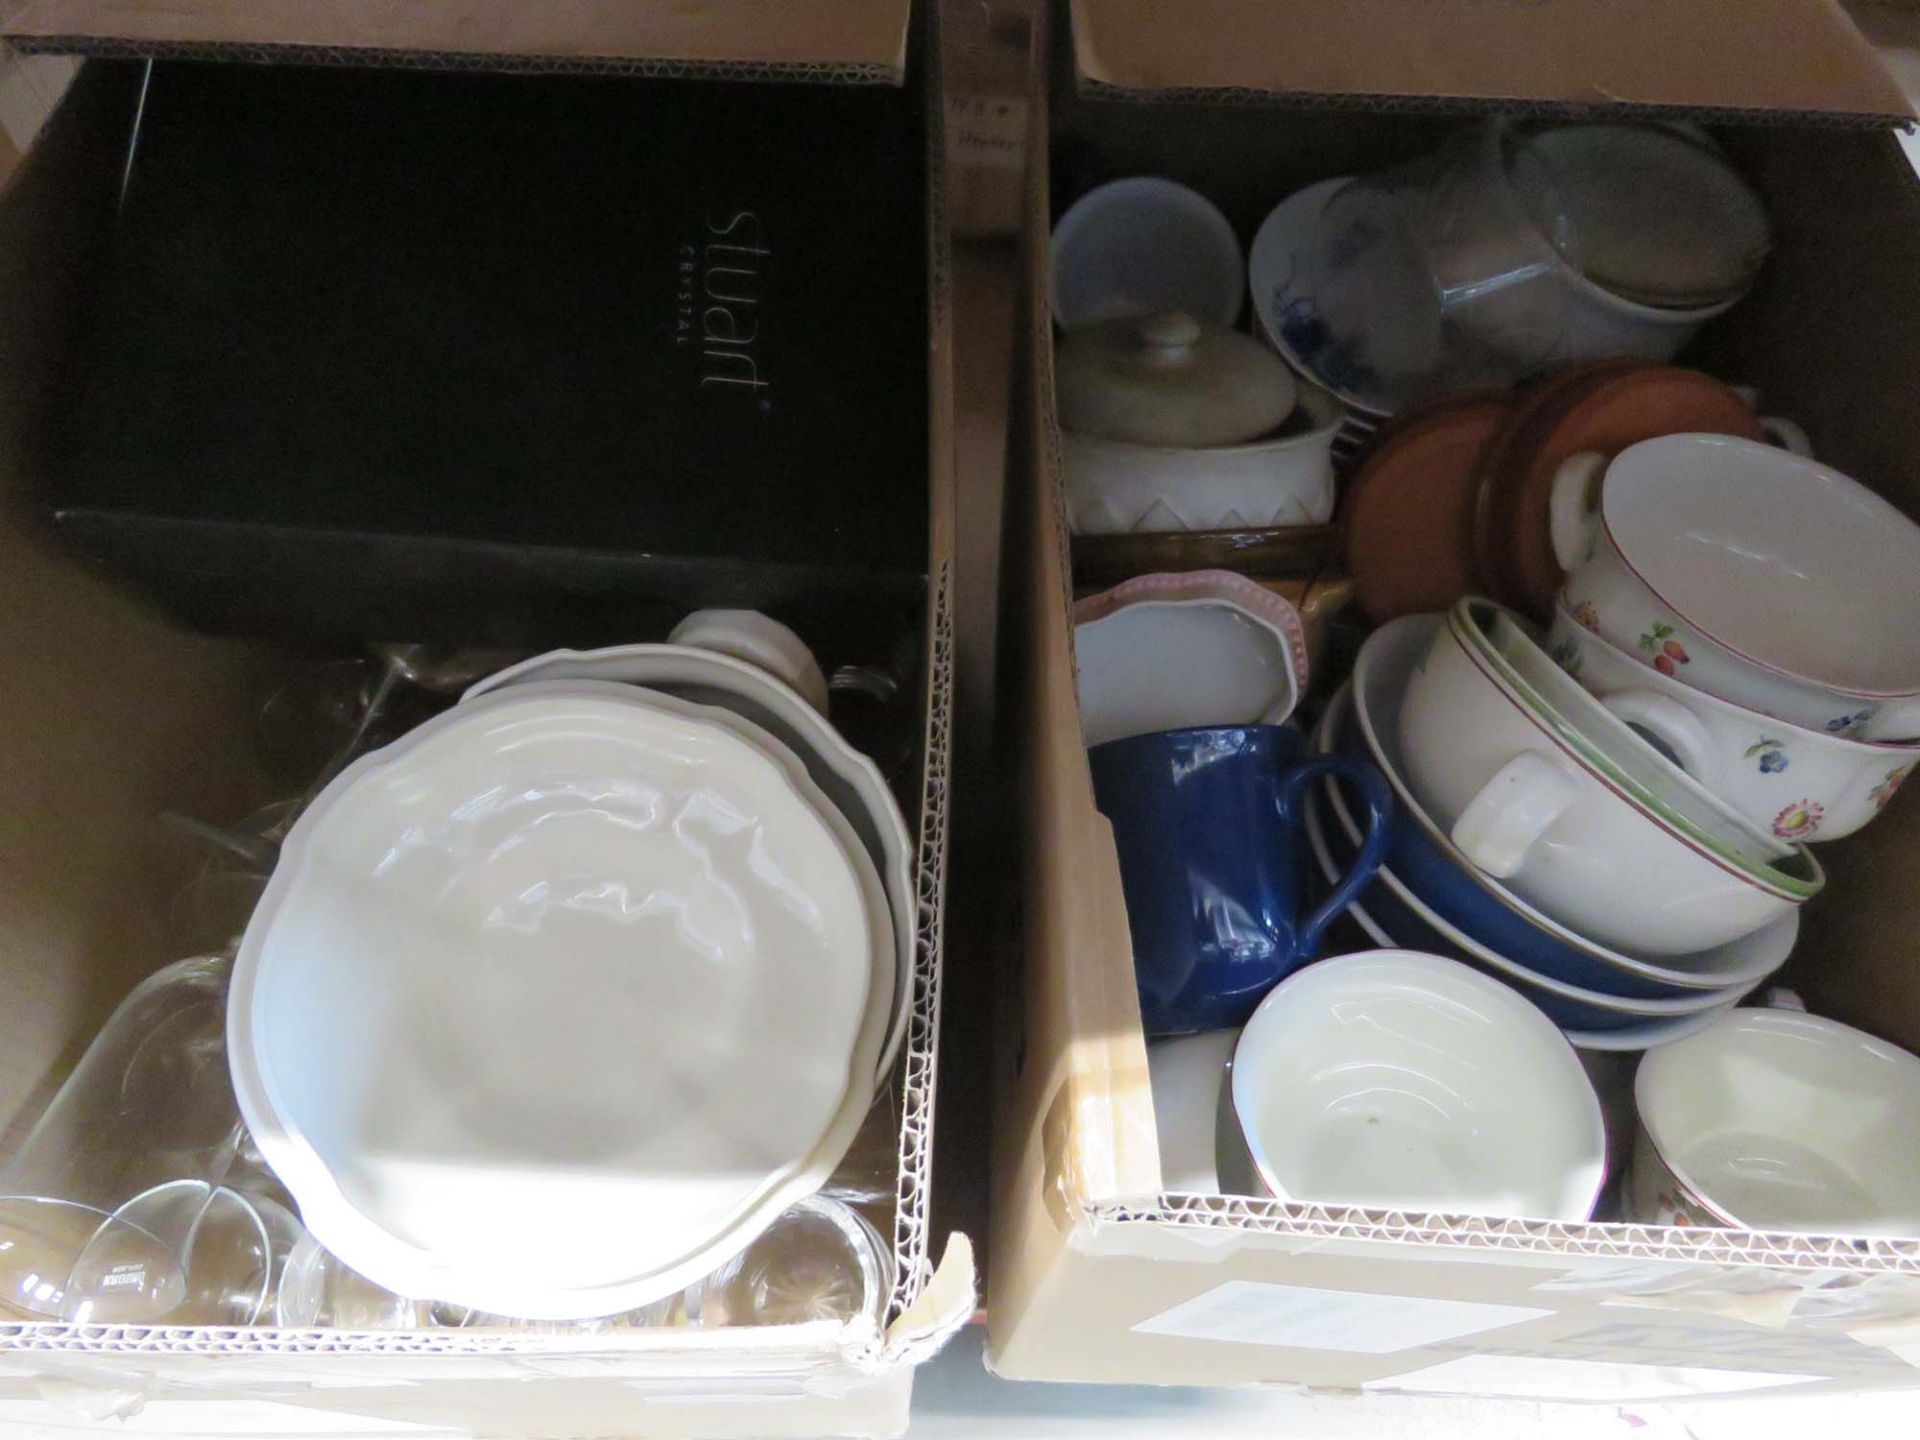 2 boxes containing wine glasses, tureen, cups, saucers, sideplates and other crockery